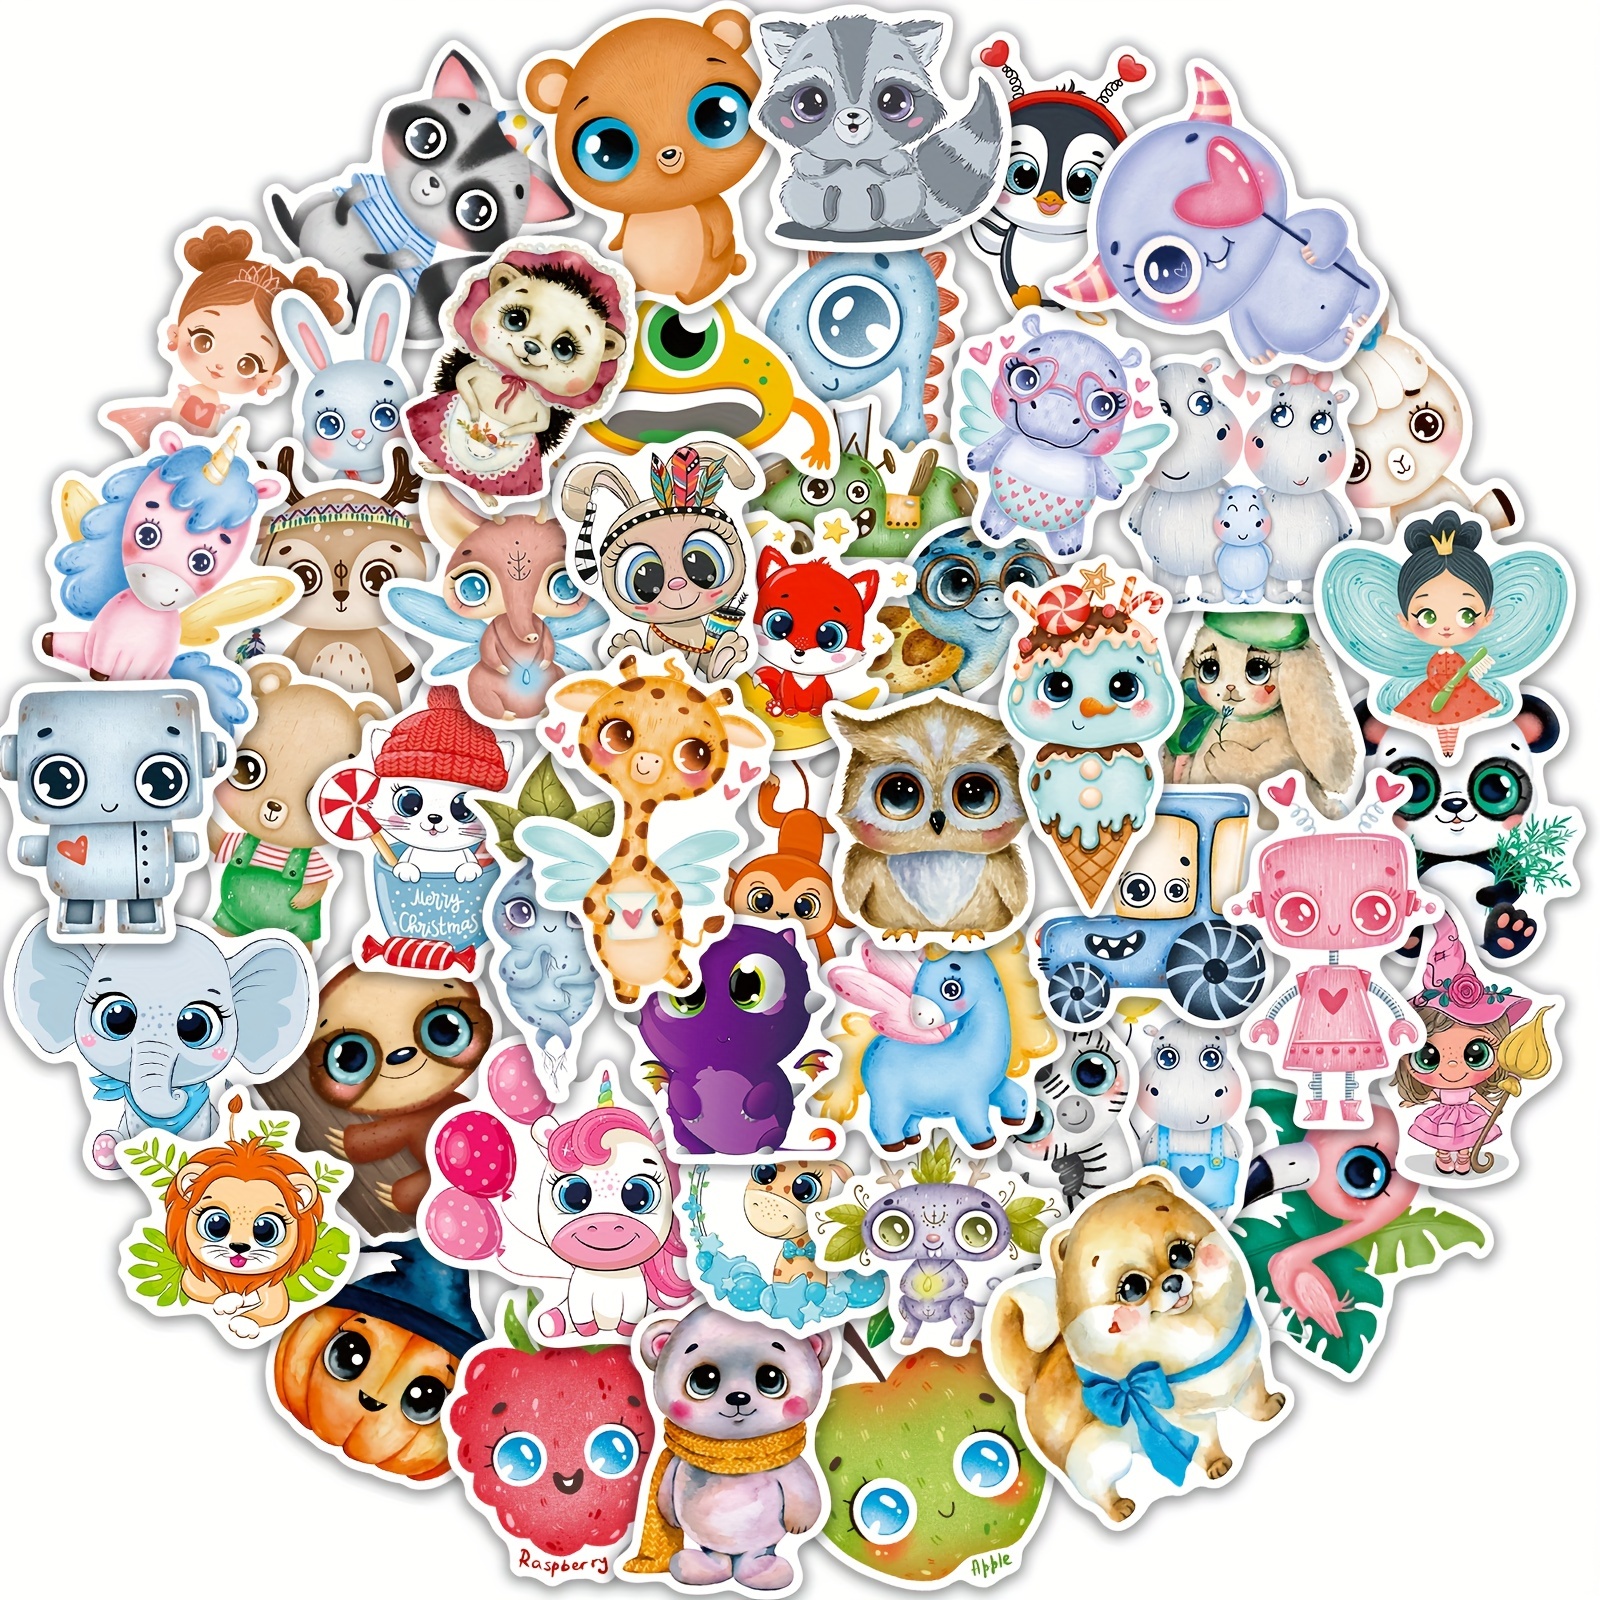 52Pcs Monster Sticker Waterproof Cute Vinyl Aesthetic Vsco Stickers For  Hydroflask, Laptop, Computer, Skateboard, Phone Cases/Kids & Adult Stickers  (S